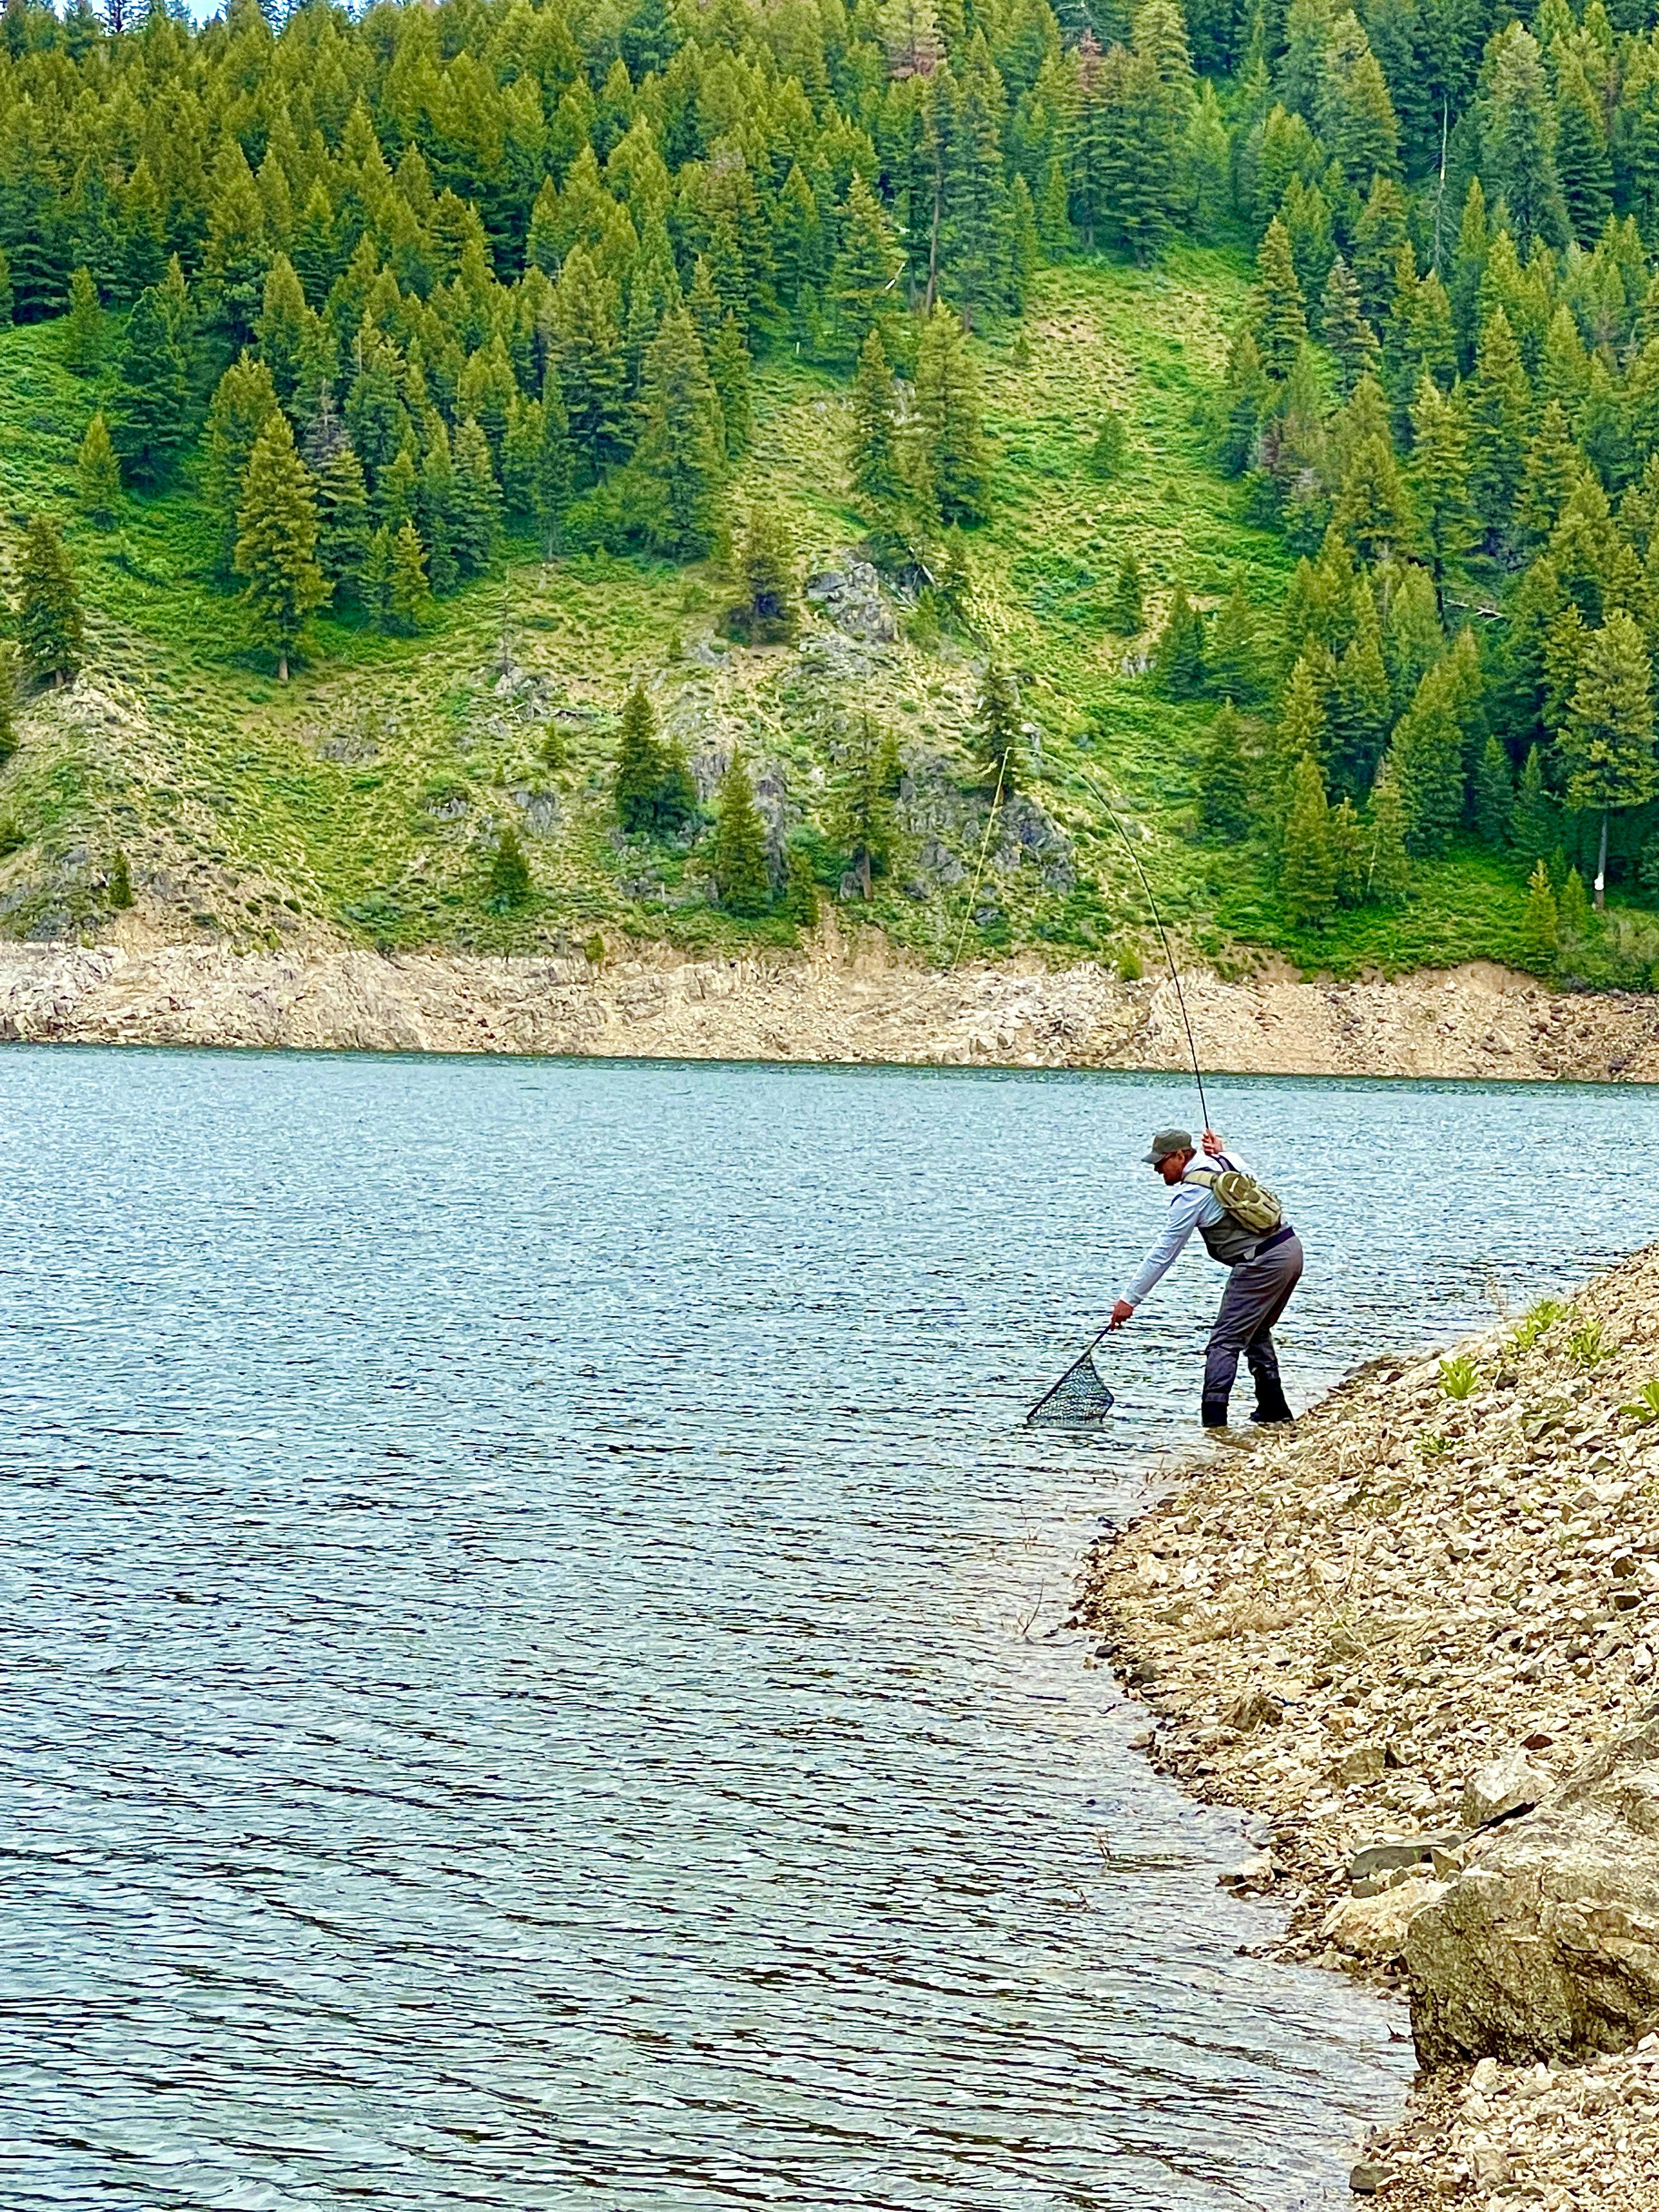 A man using a fishing net on the edge of a body of water.